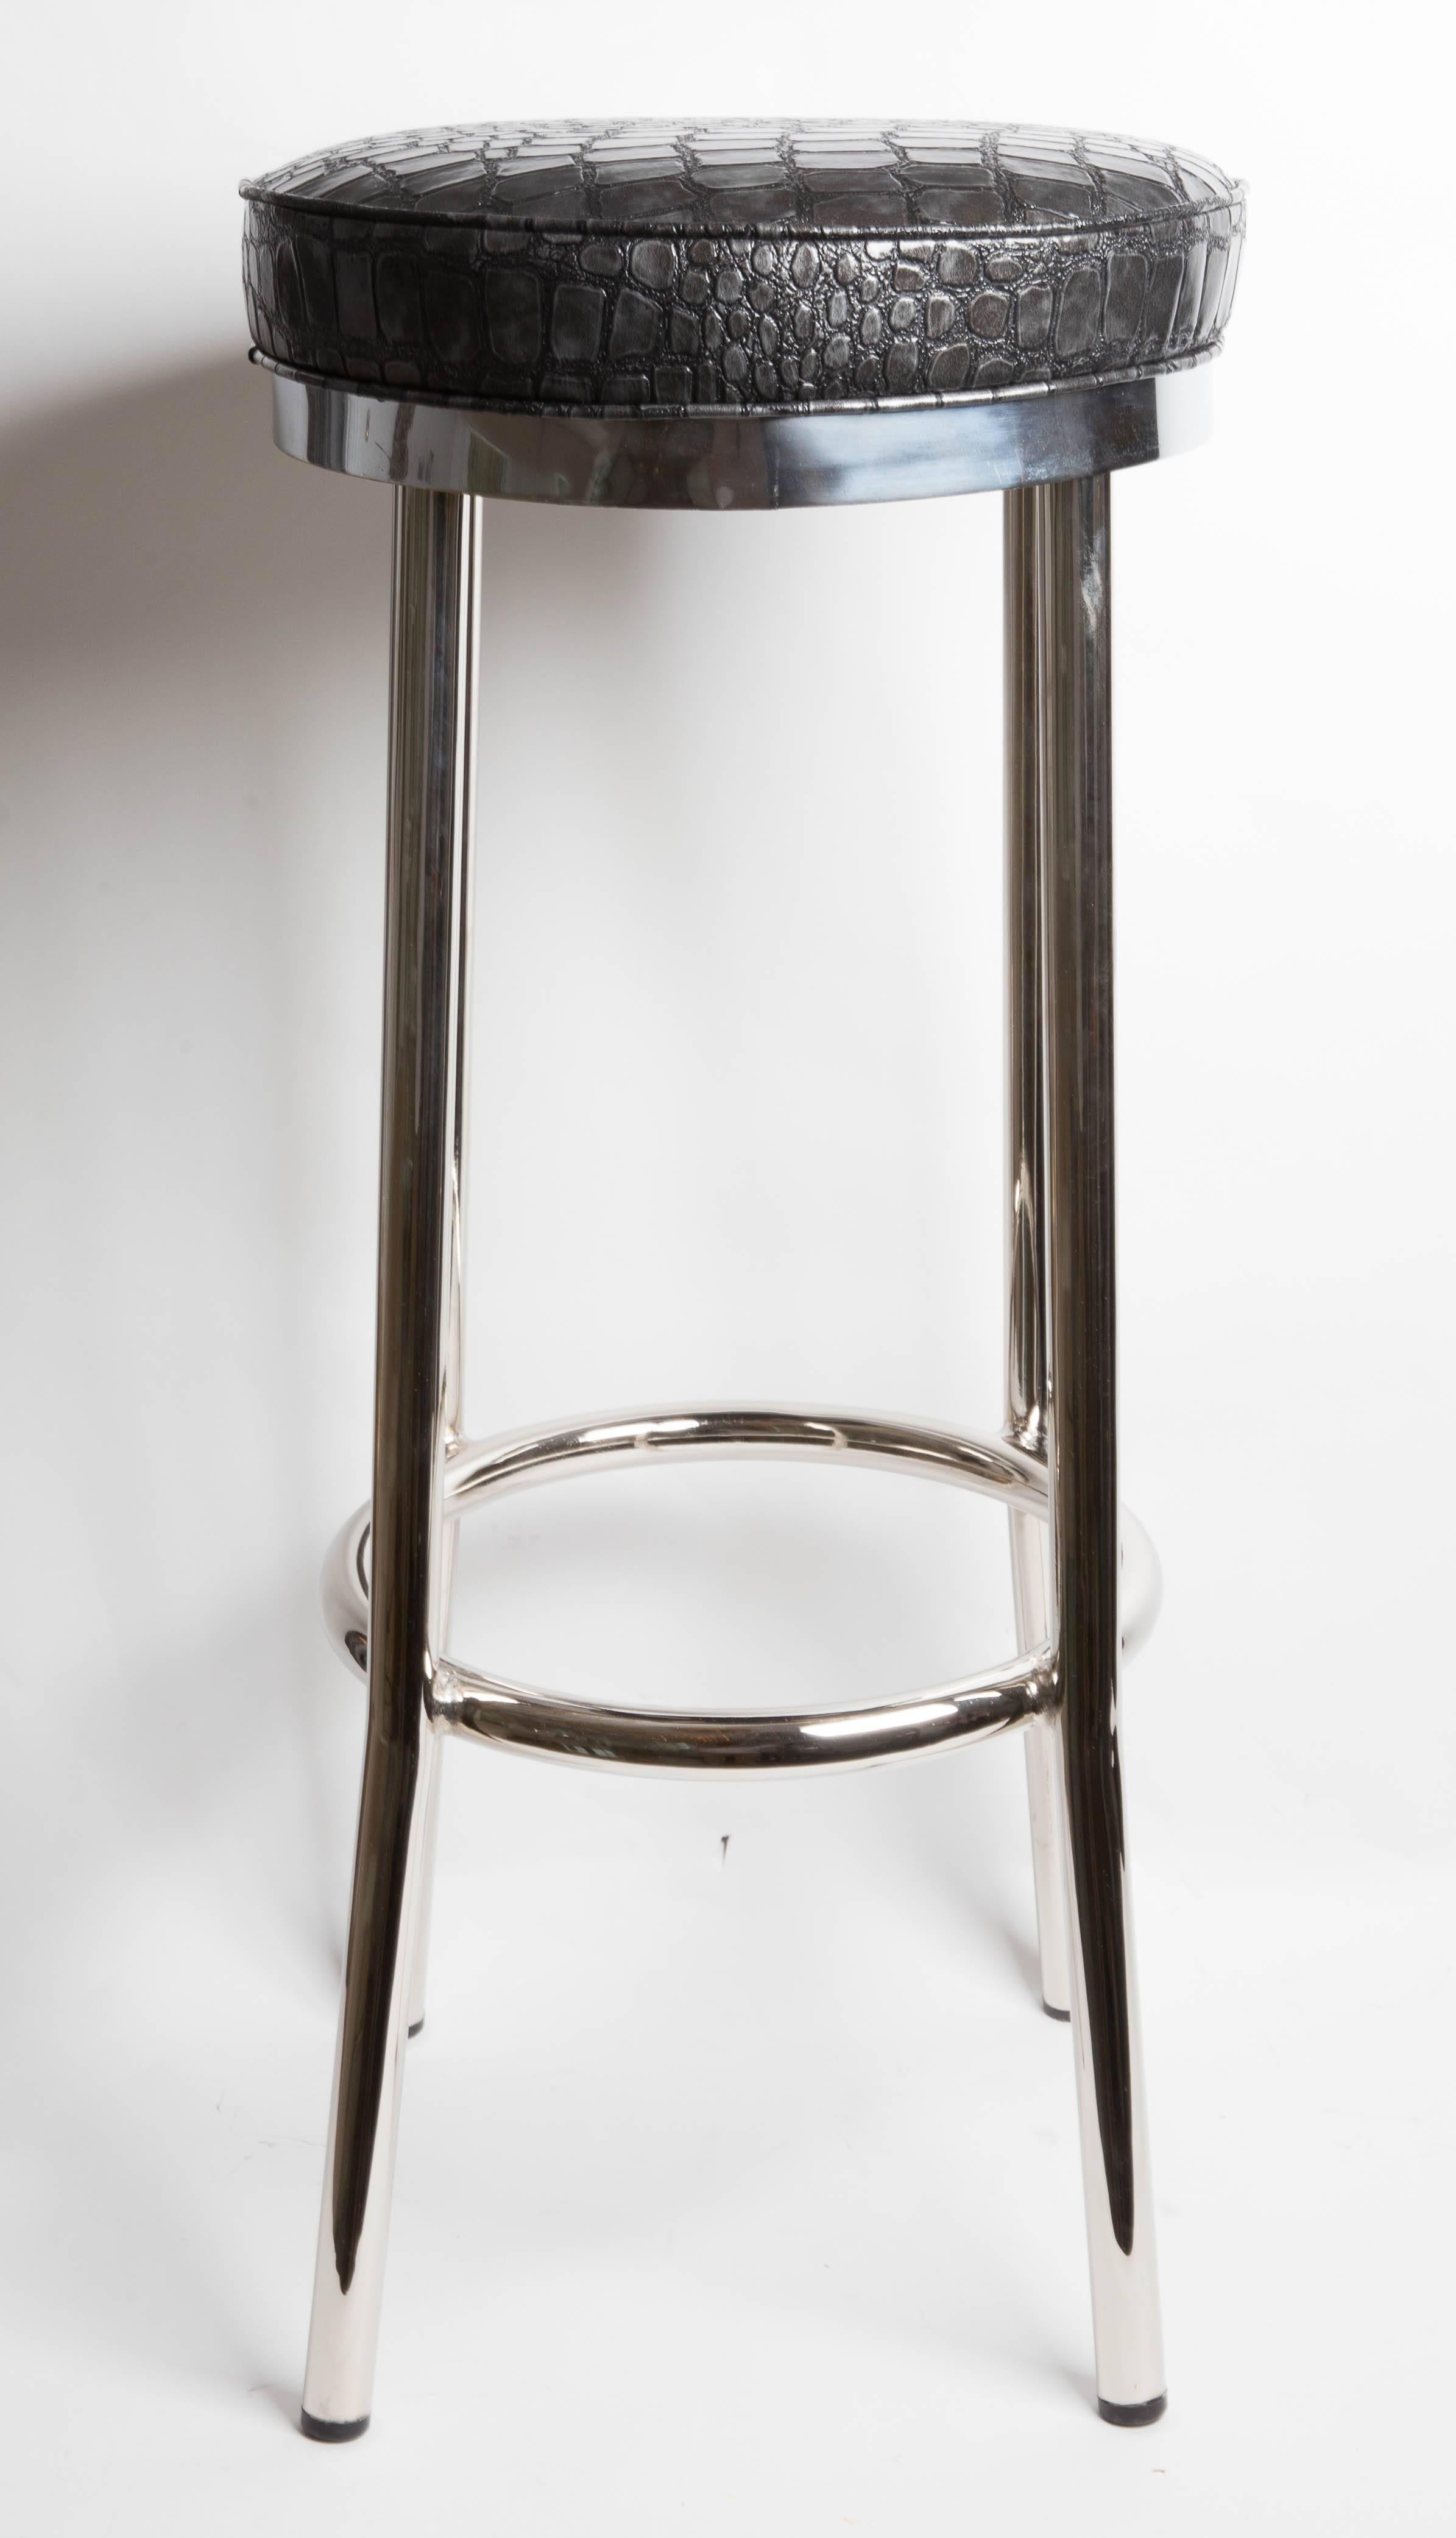 Mid-Century Modern Set of Four Chrome Bar Stools Upholstered in Black and Grey Faux Crock